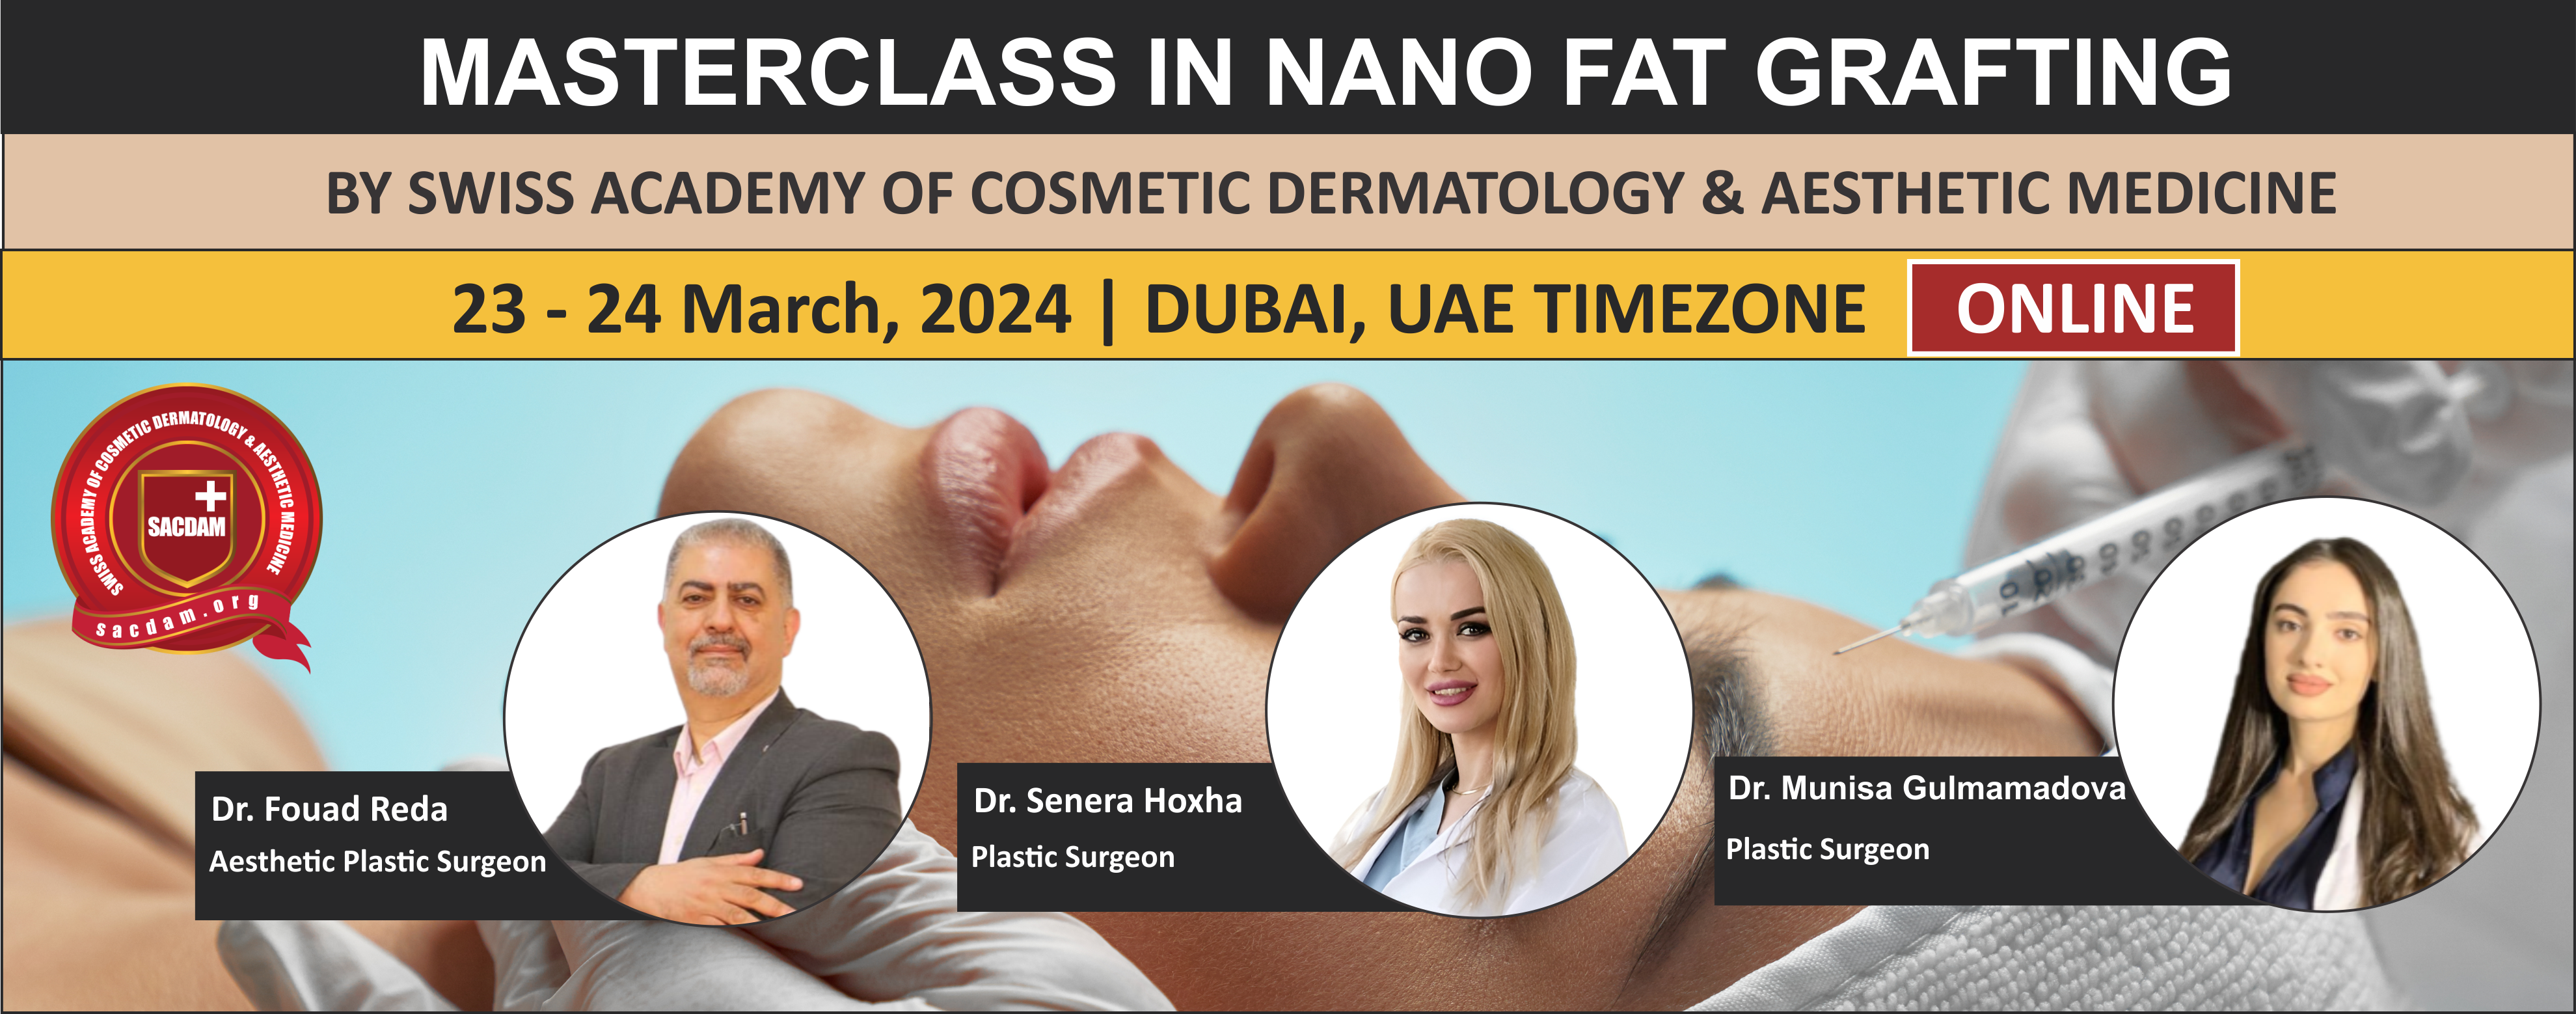 Banner - Nano Fat Grafting - 23 - 24 March, 2024 - Online